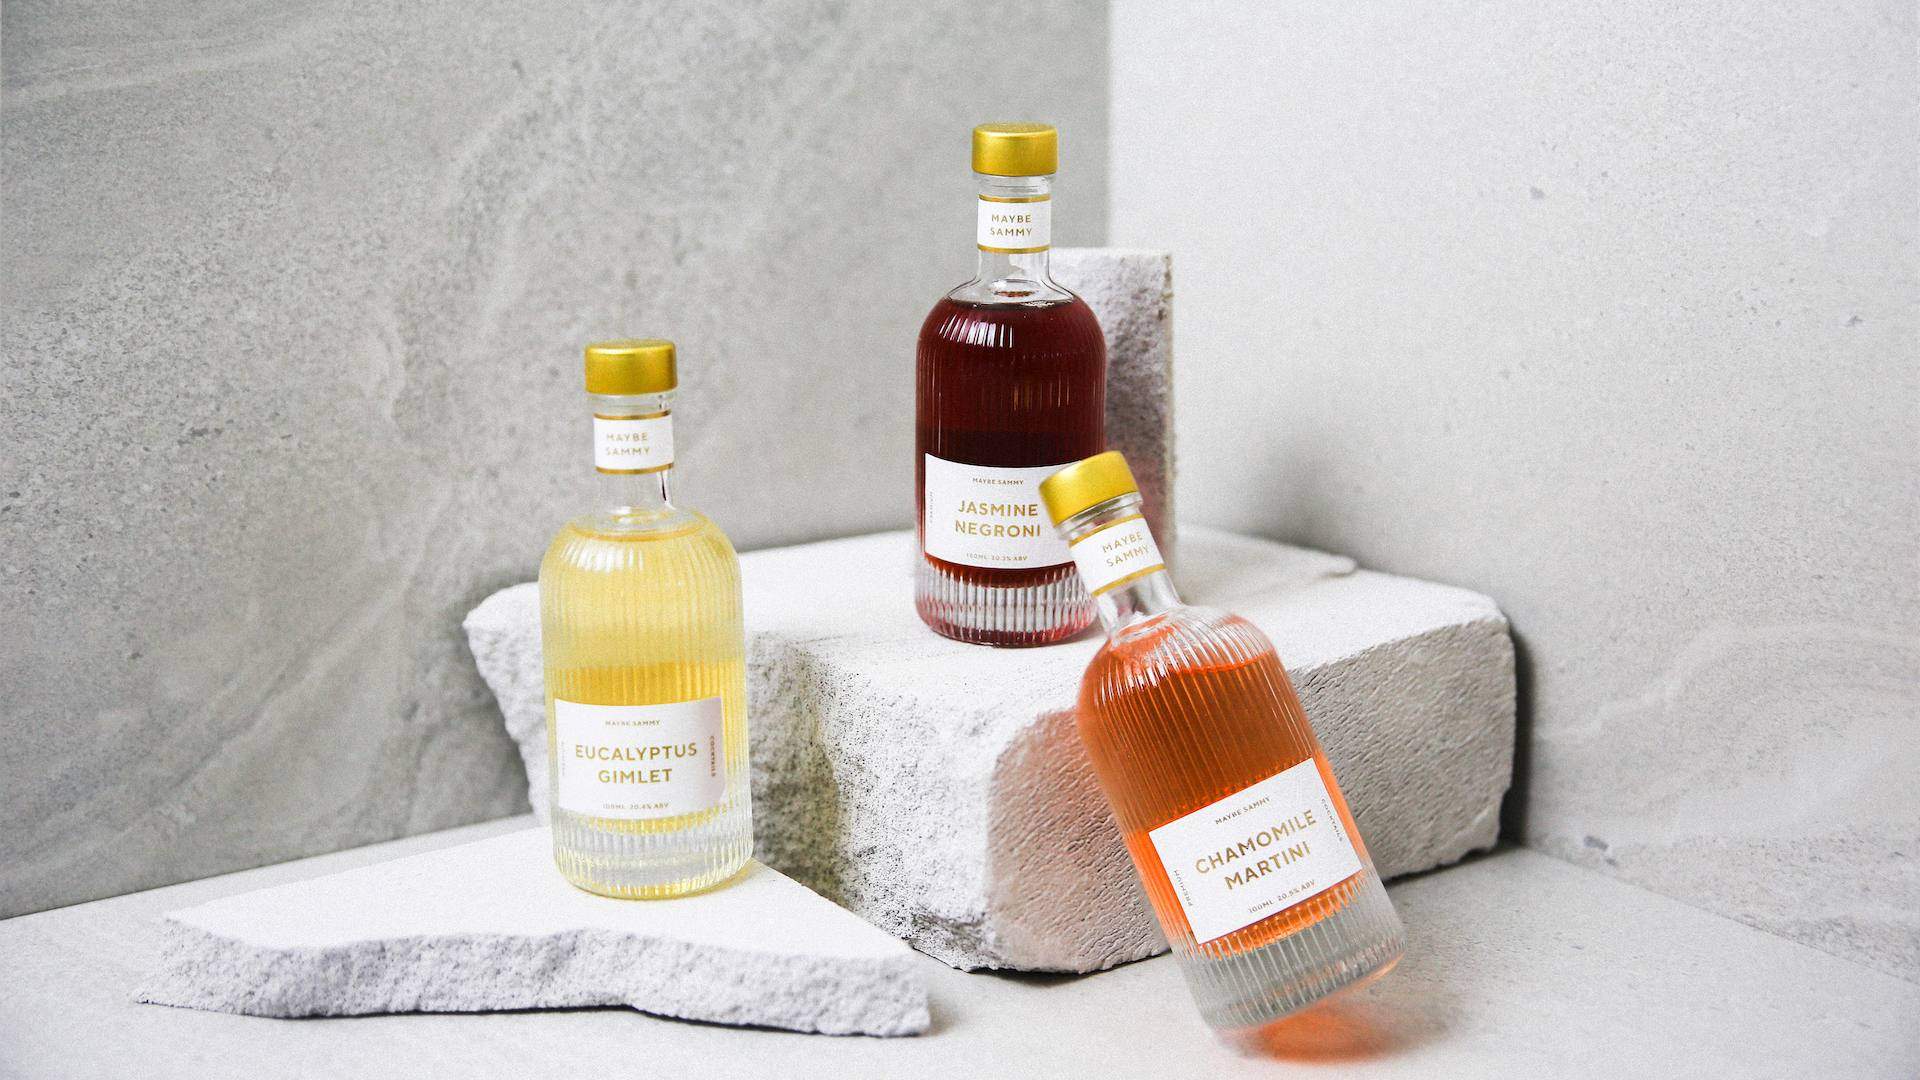 Sydney's Award-Winning Maybe Sammy Has Released a Trio of Bottled Cocktails to Sip at Home